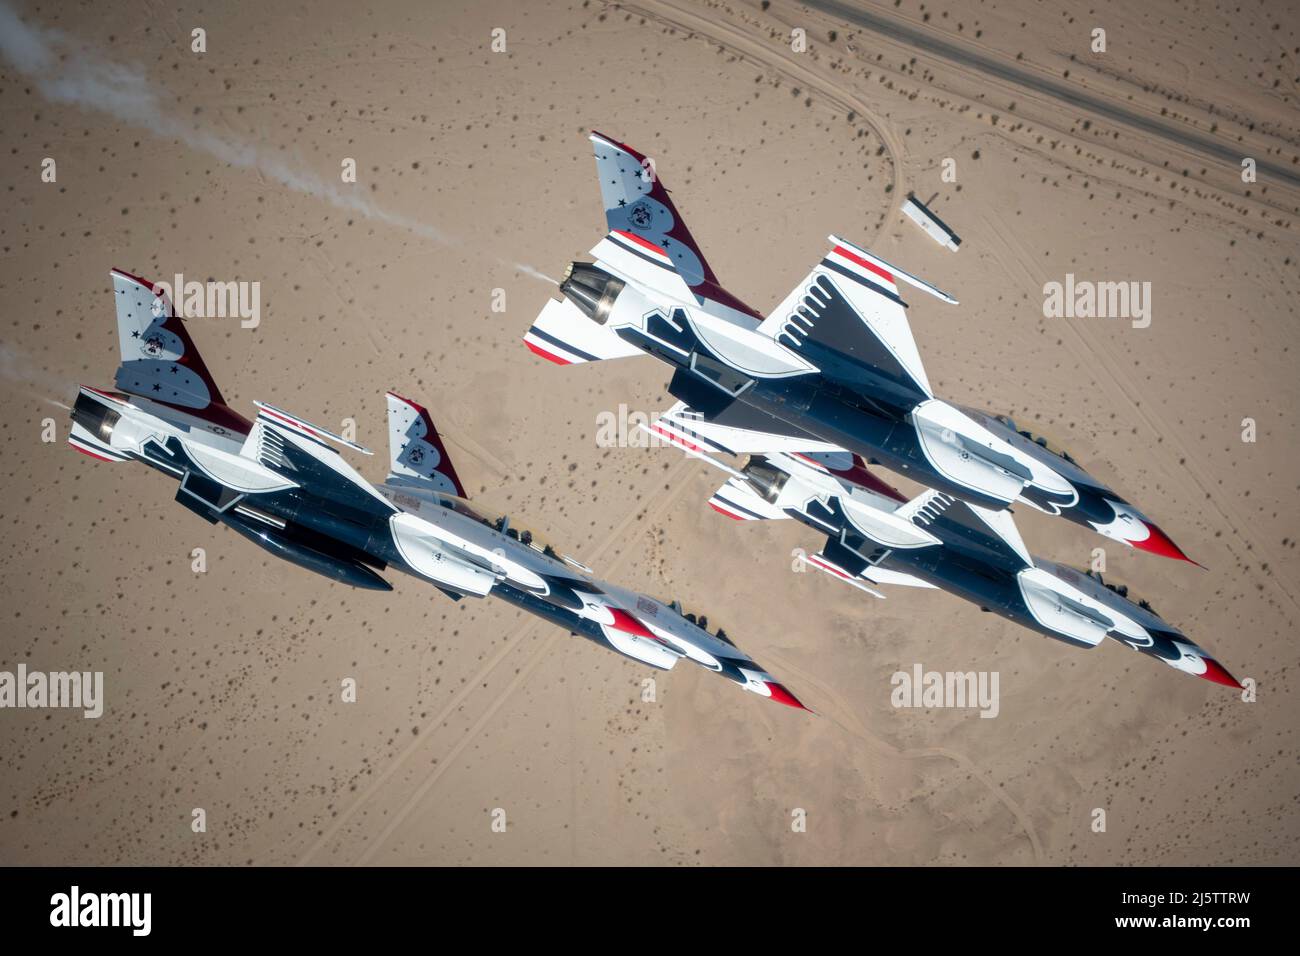 The United States Air Force Air Demonstration Squadron, known as the “ Thunderbirds,” perform joint training over Naval Air Facility El Centro,  California, March 1, 2022. The Thunderbirds and Blue Angels spent a